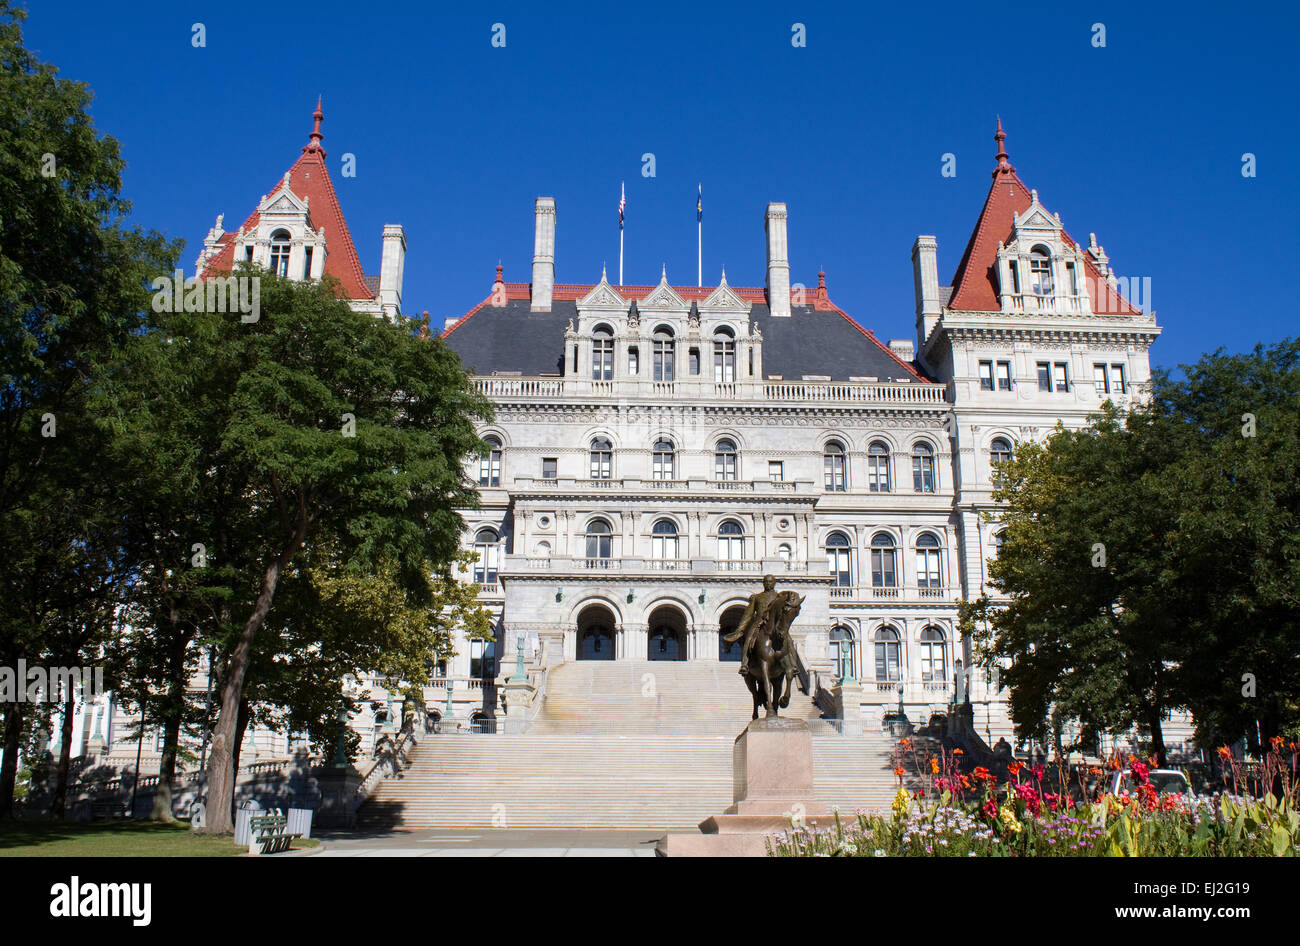 New York state capitol building, located in Albany, NY is part of the Empire State Plaza and is a National Historic Landmark. Stock Photo